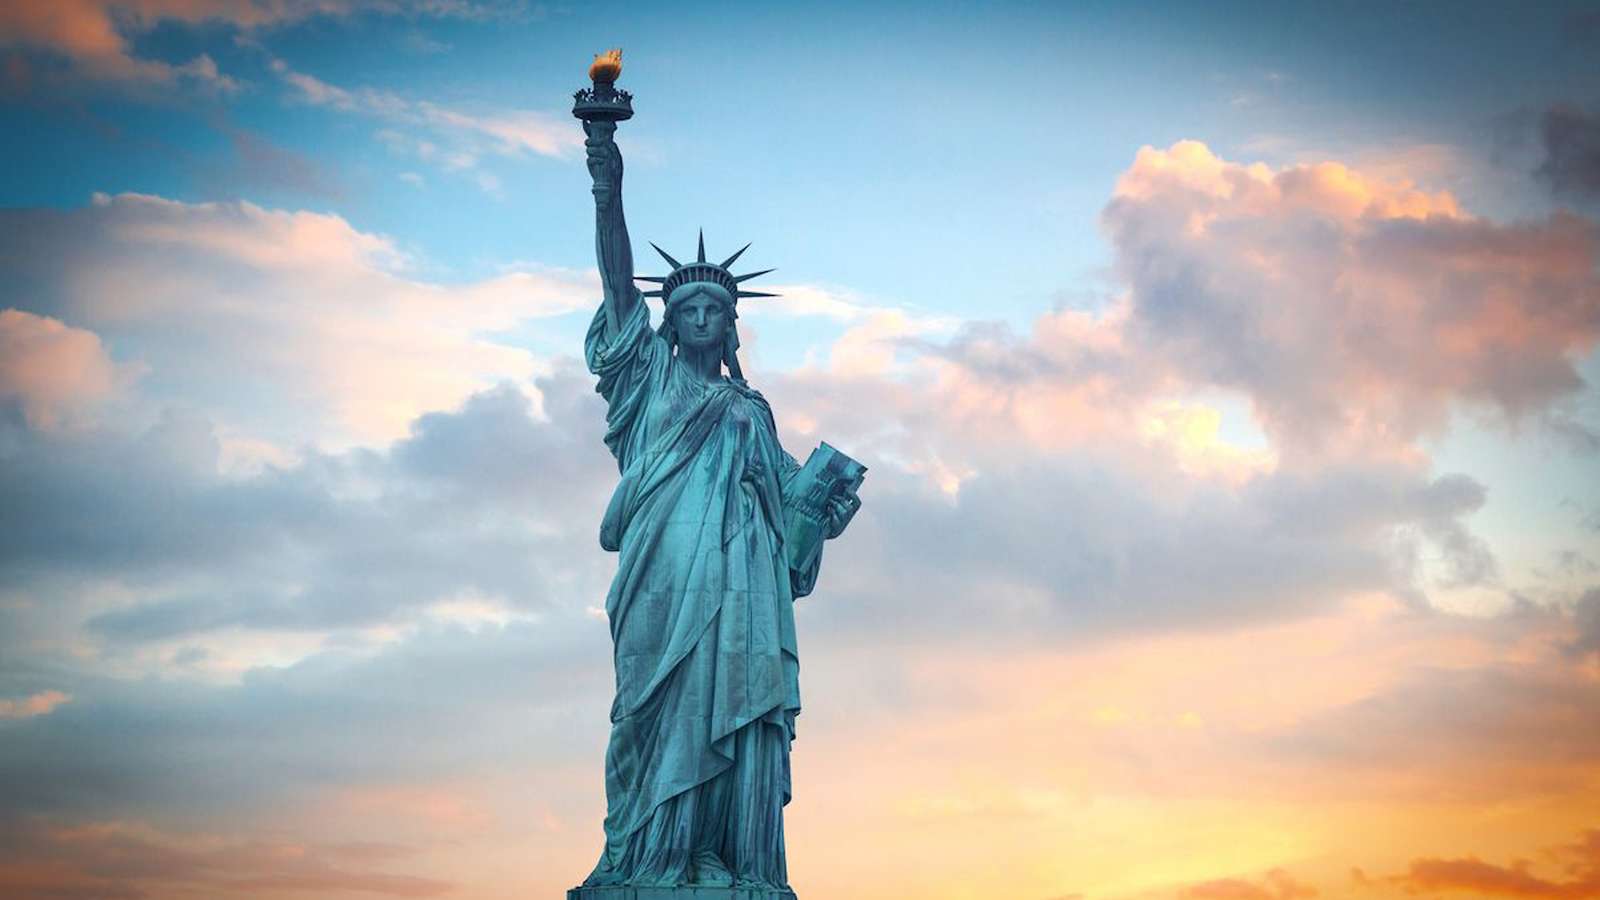 Statue of Liberty0 puzzle online from photo